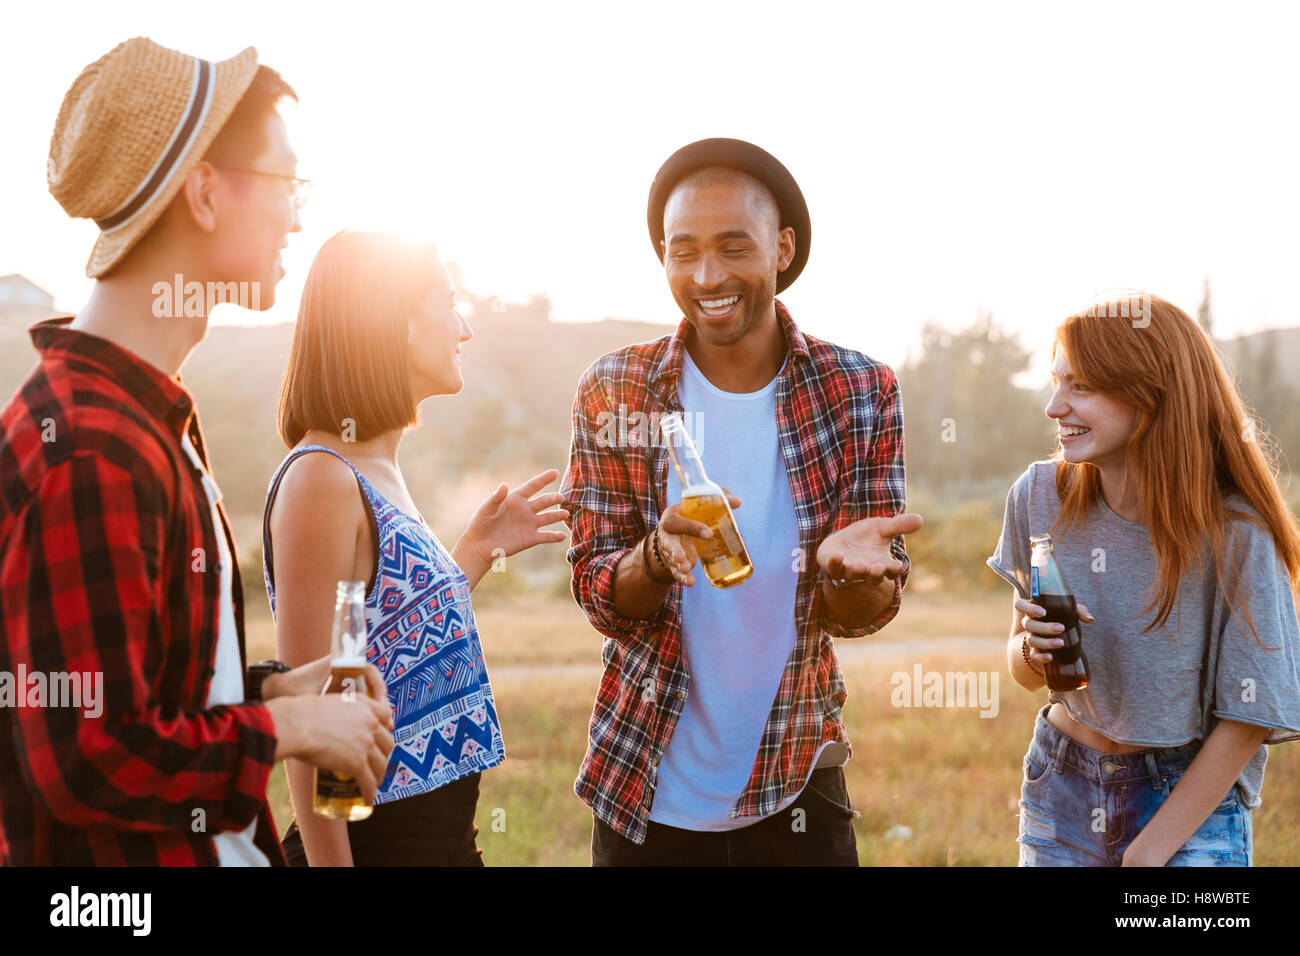 Multiethnic group of cheerful young people with beer and soda talking and laughing outdoors Stock Photo